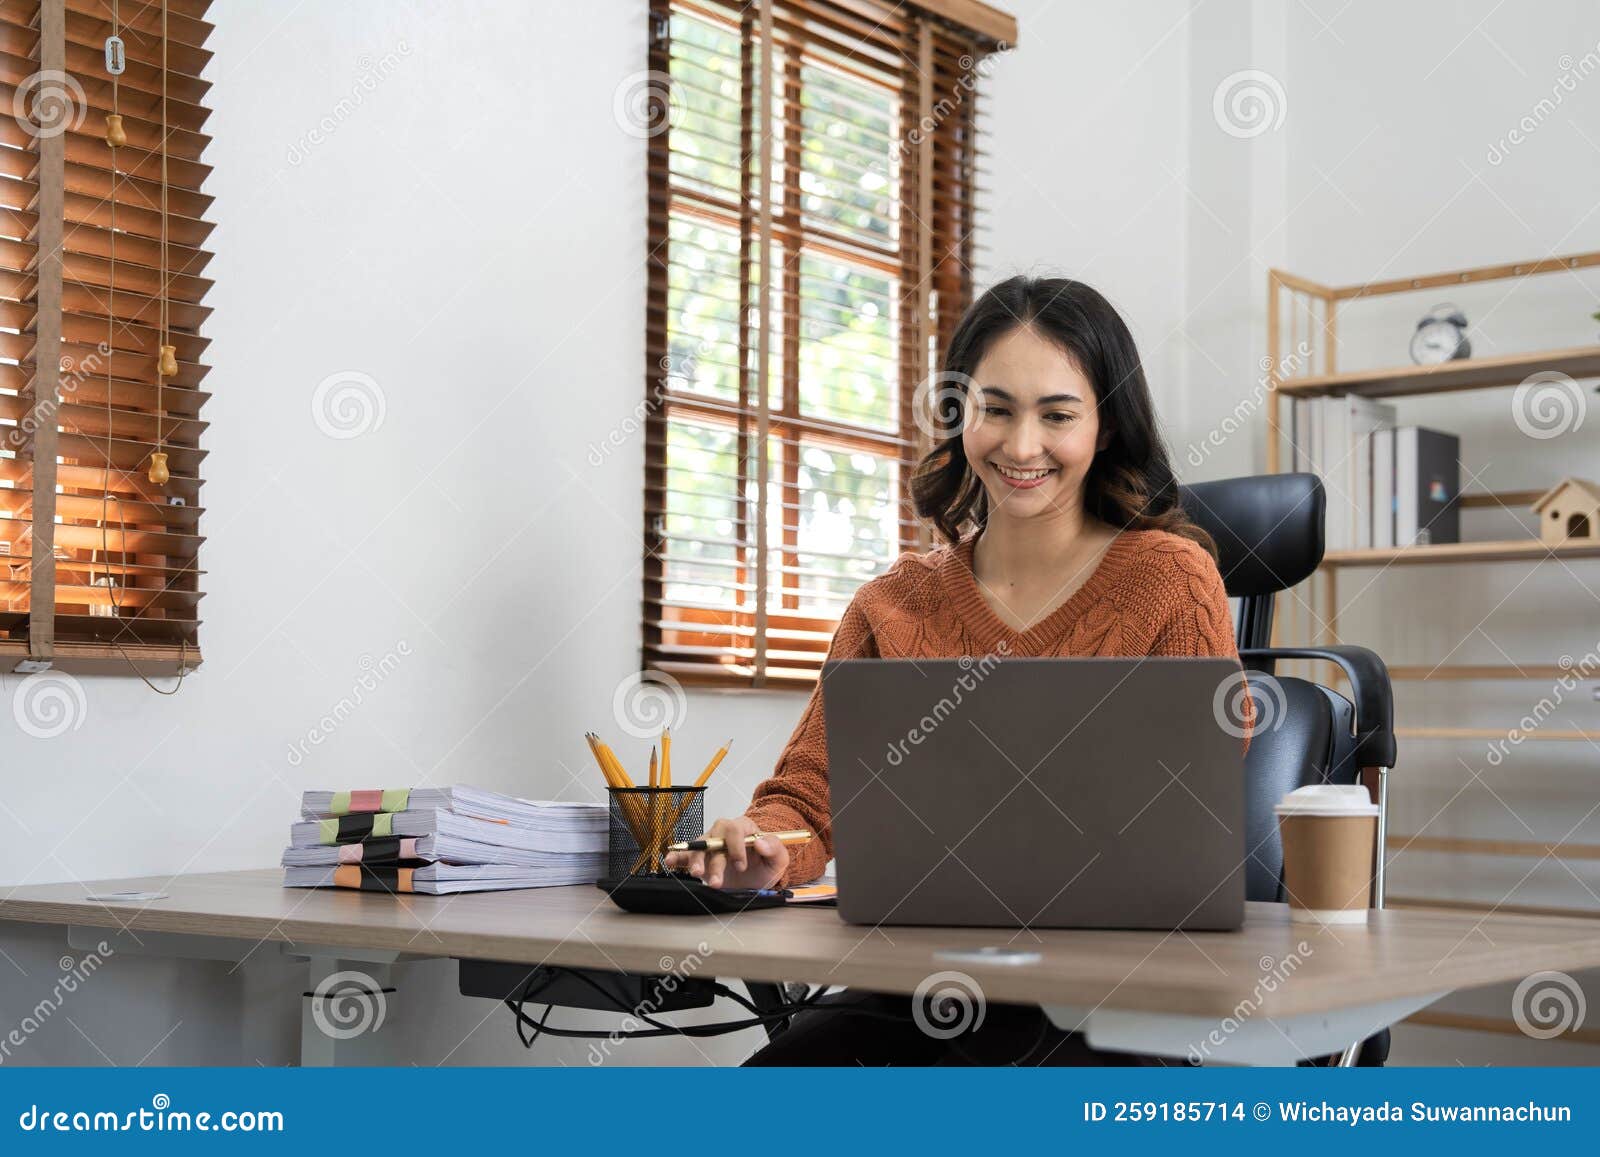 Asian Indian Female Director Working in the Office Sitting at a Desk ...